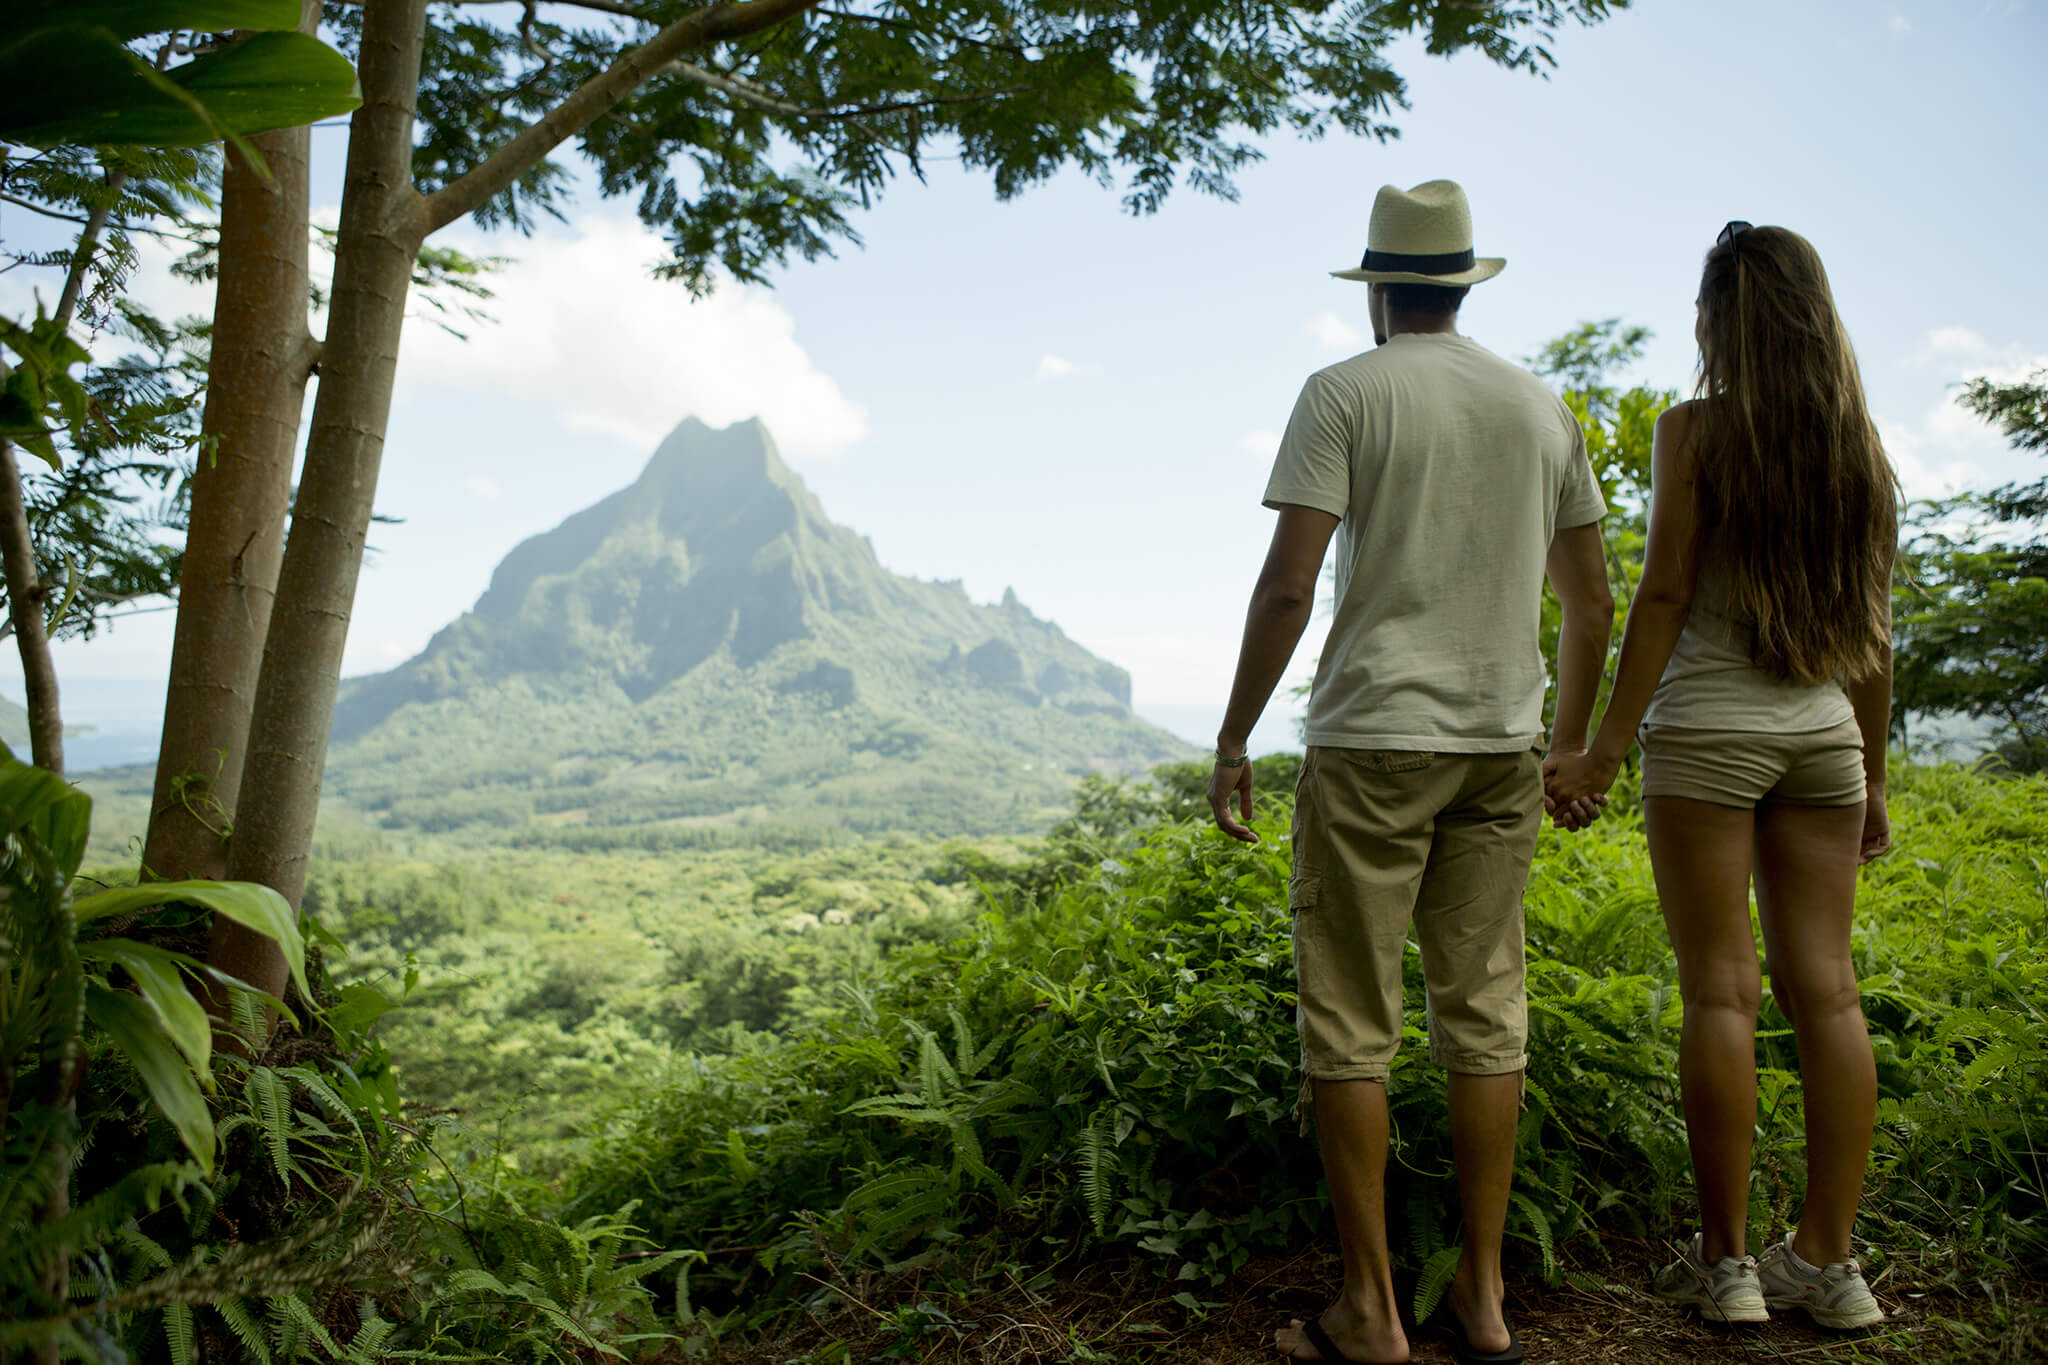 Couple watching the view on the Rotui mount in Moorea